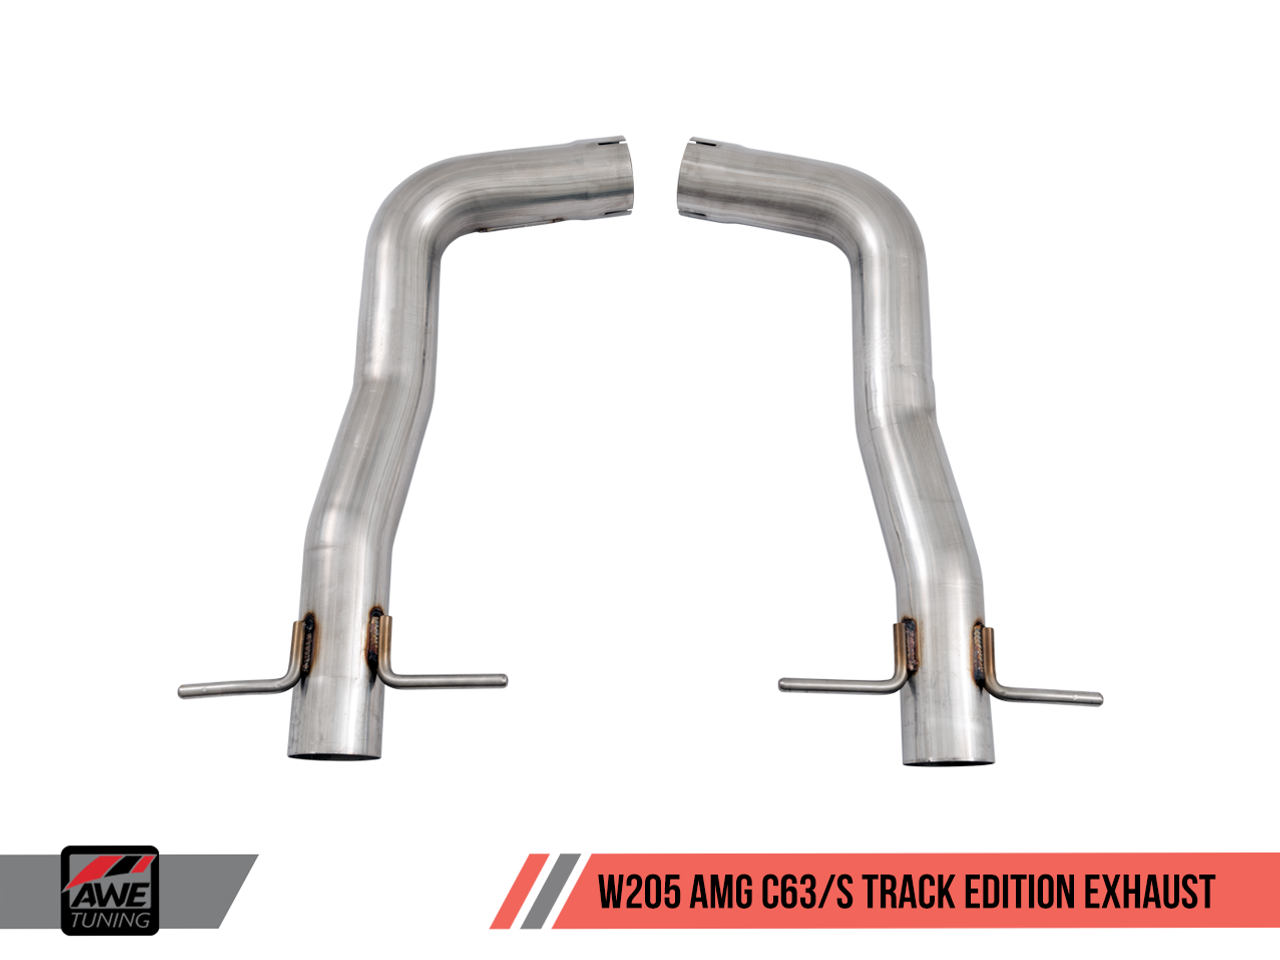 AWE Tuning Mercedes-Benz W205 AMG C63 / C63S Track Edition Exhaust